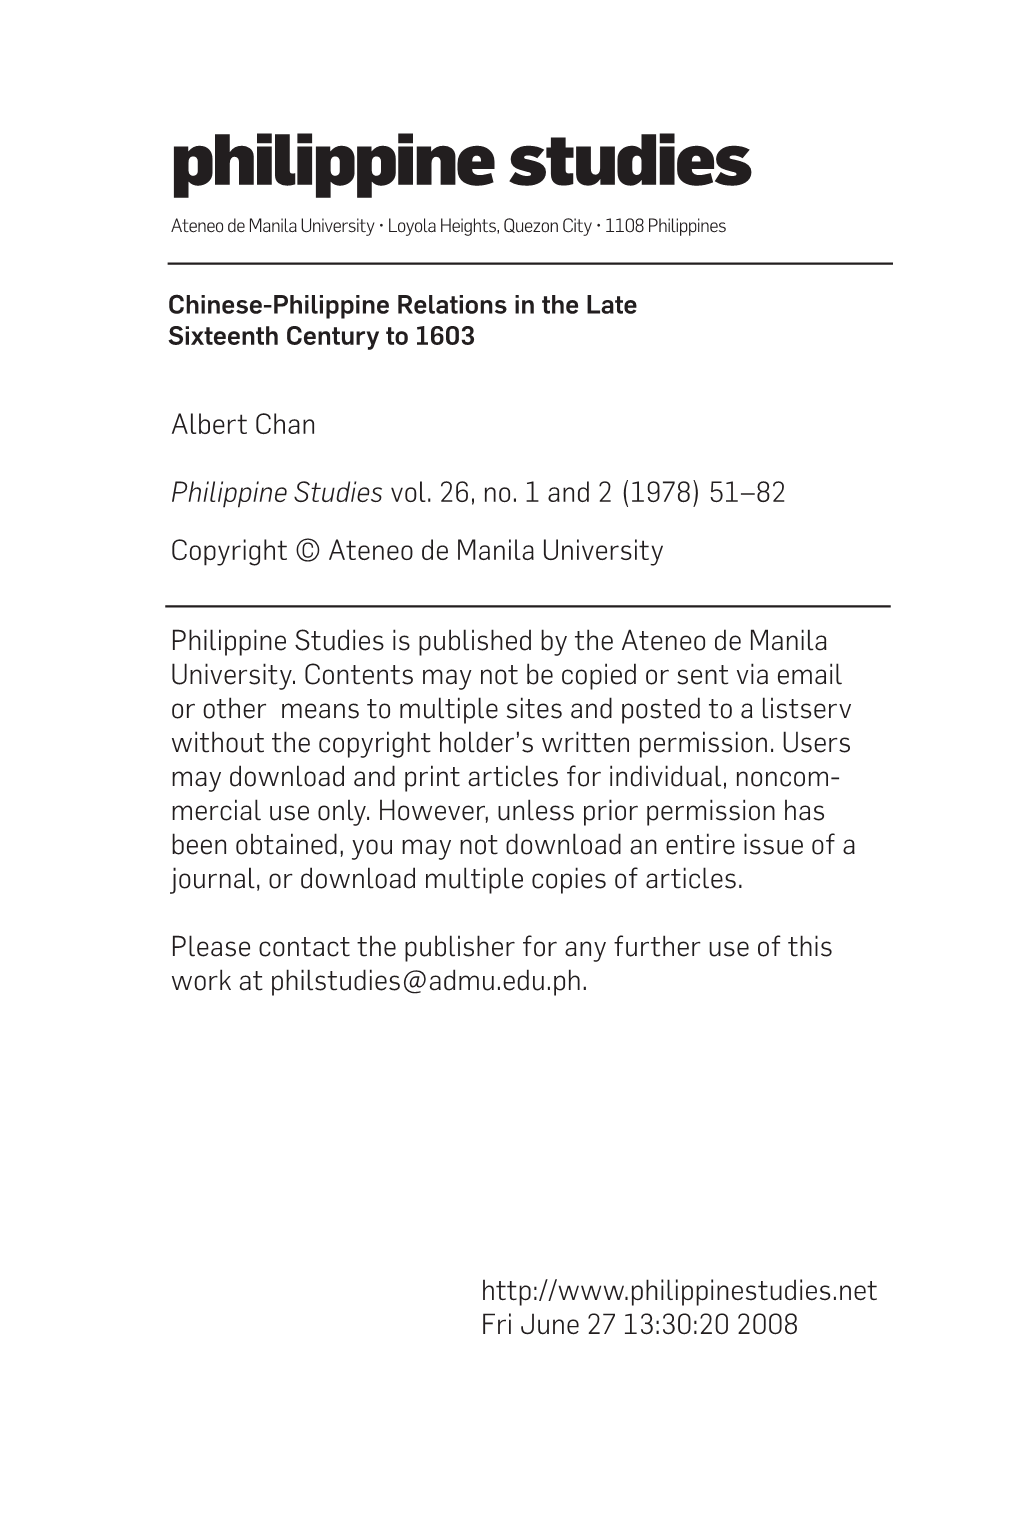 Chinese-Philippine Relations in the Late Sixteenth Century to 1603